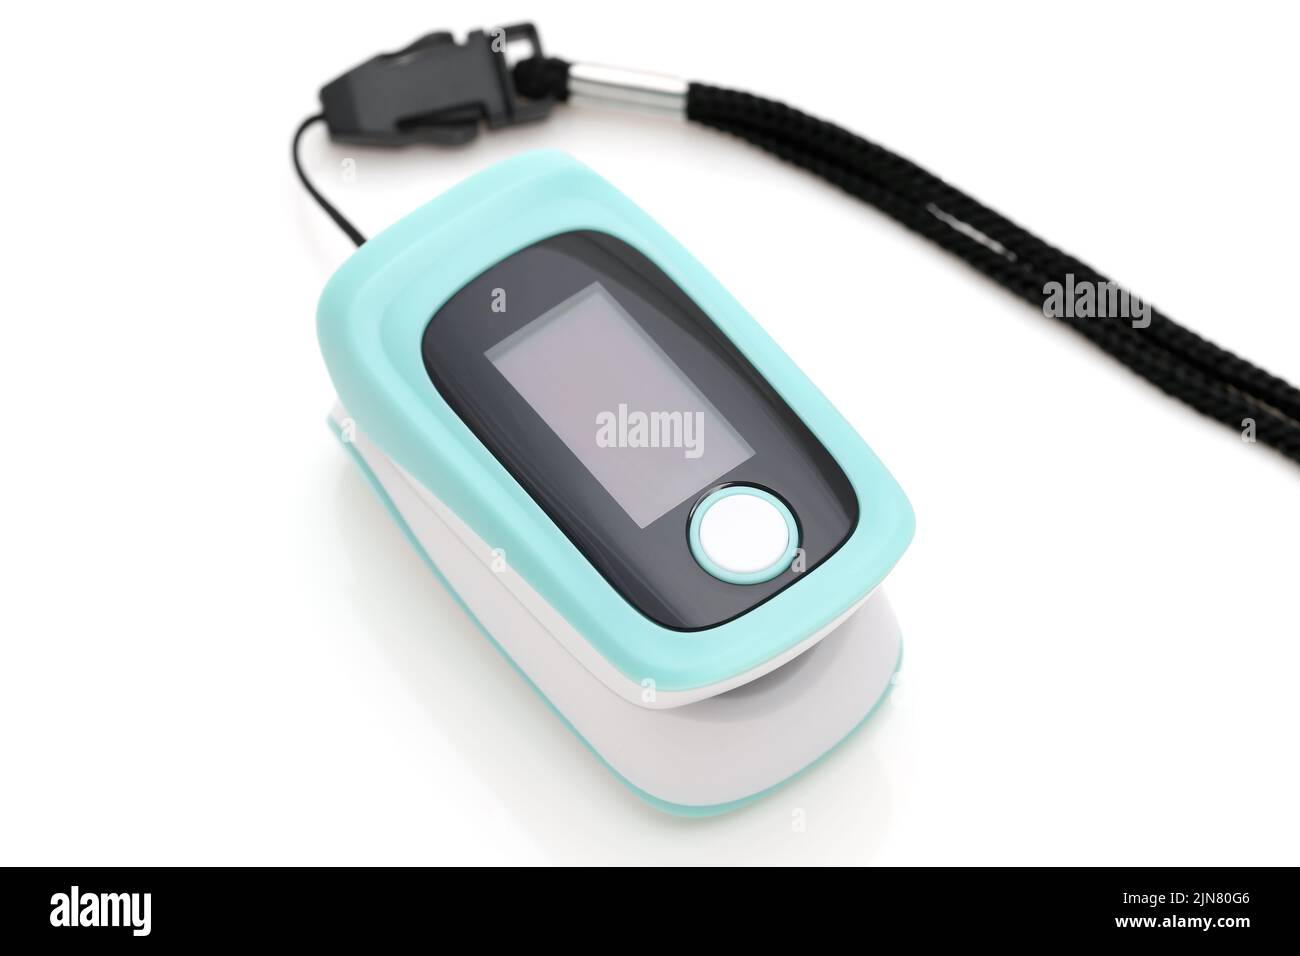 Pulse oximeter device isolated, healthcare monitoring concept Stock Photo